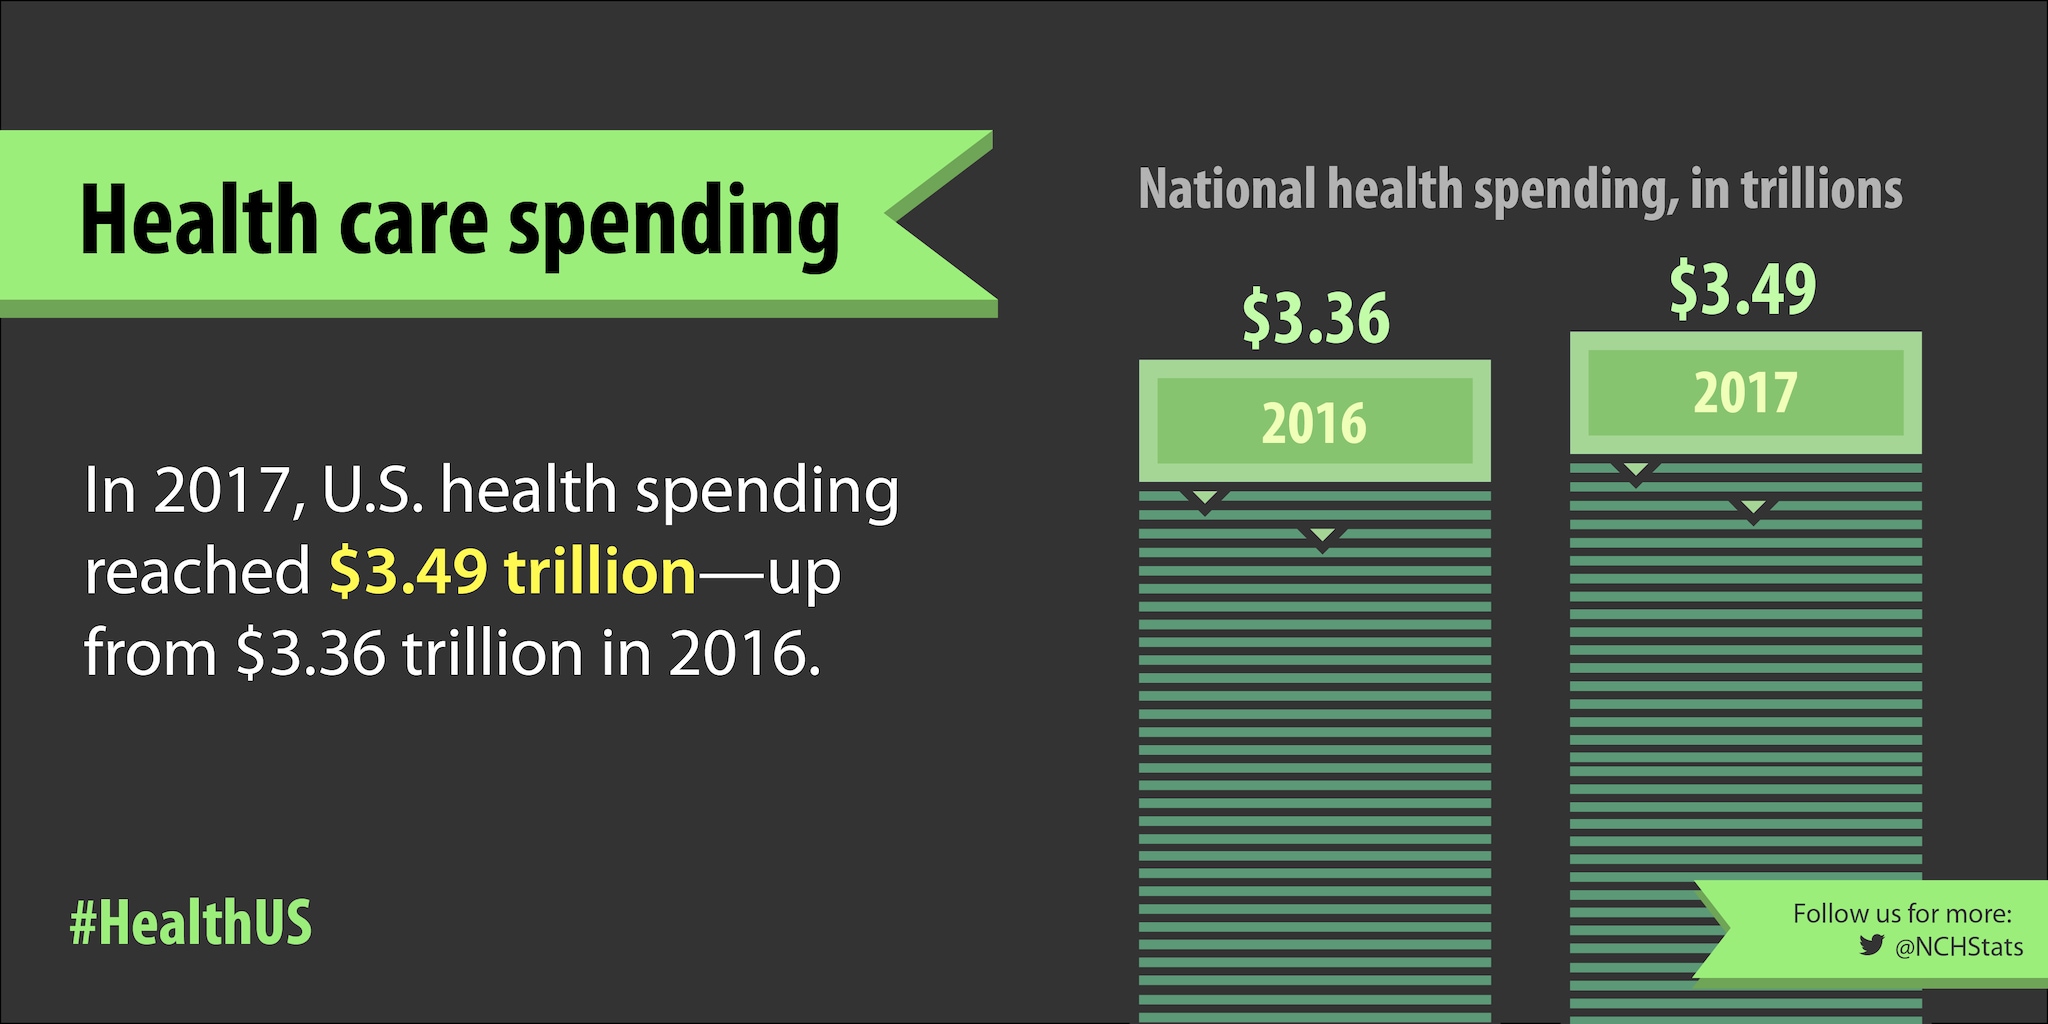 In 2017, U.S. health spending reached $3.49 trillion - up from $3.36 trillion in 2016.